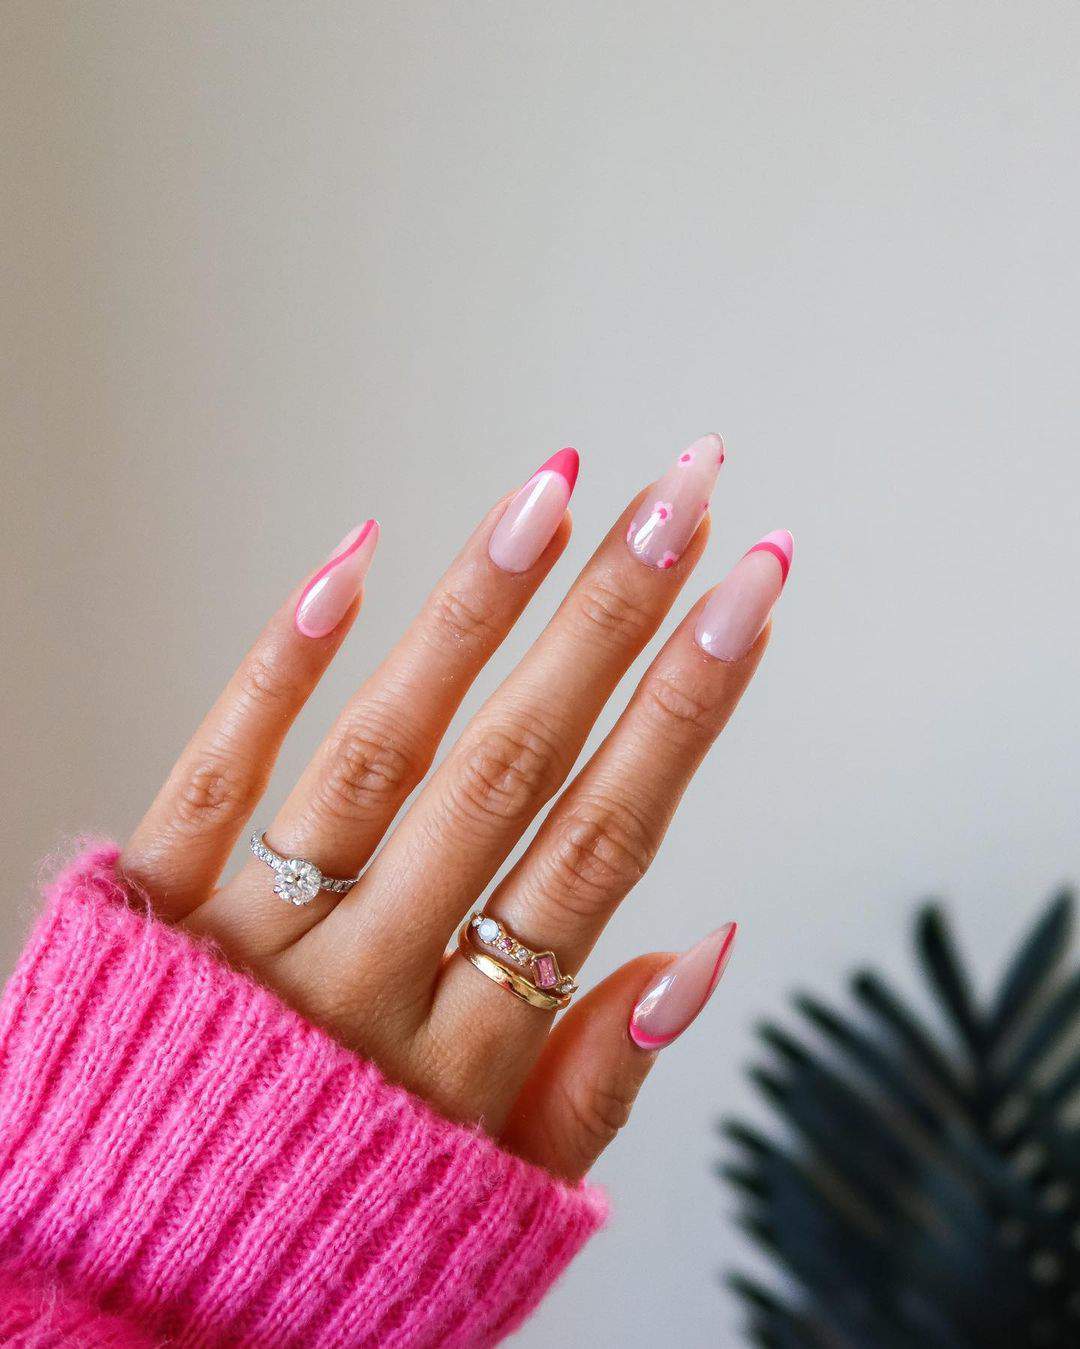 The 100+ Best Nail Designs Trends And Ideas In 2021 images 11